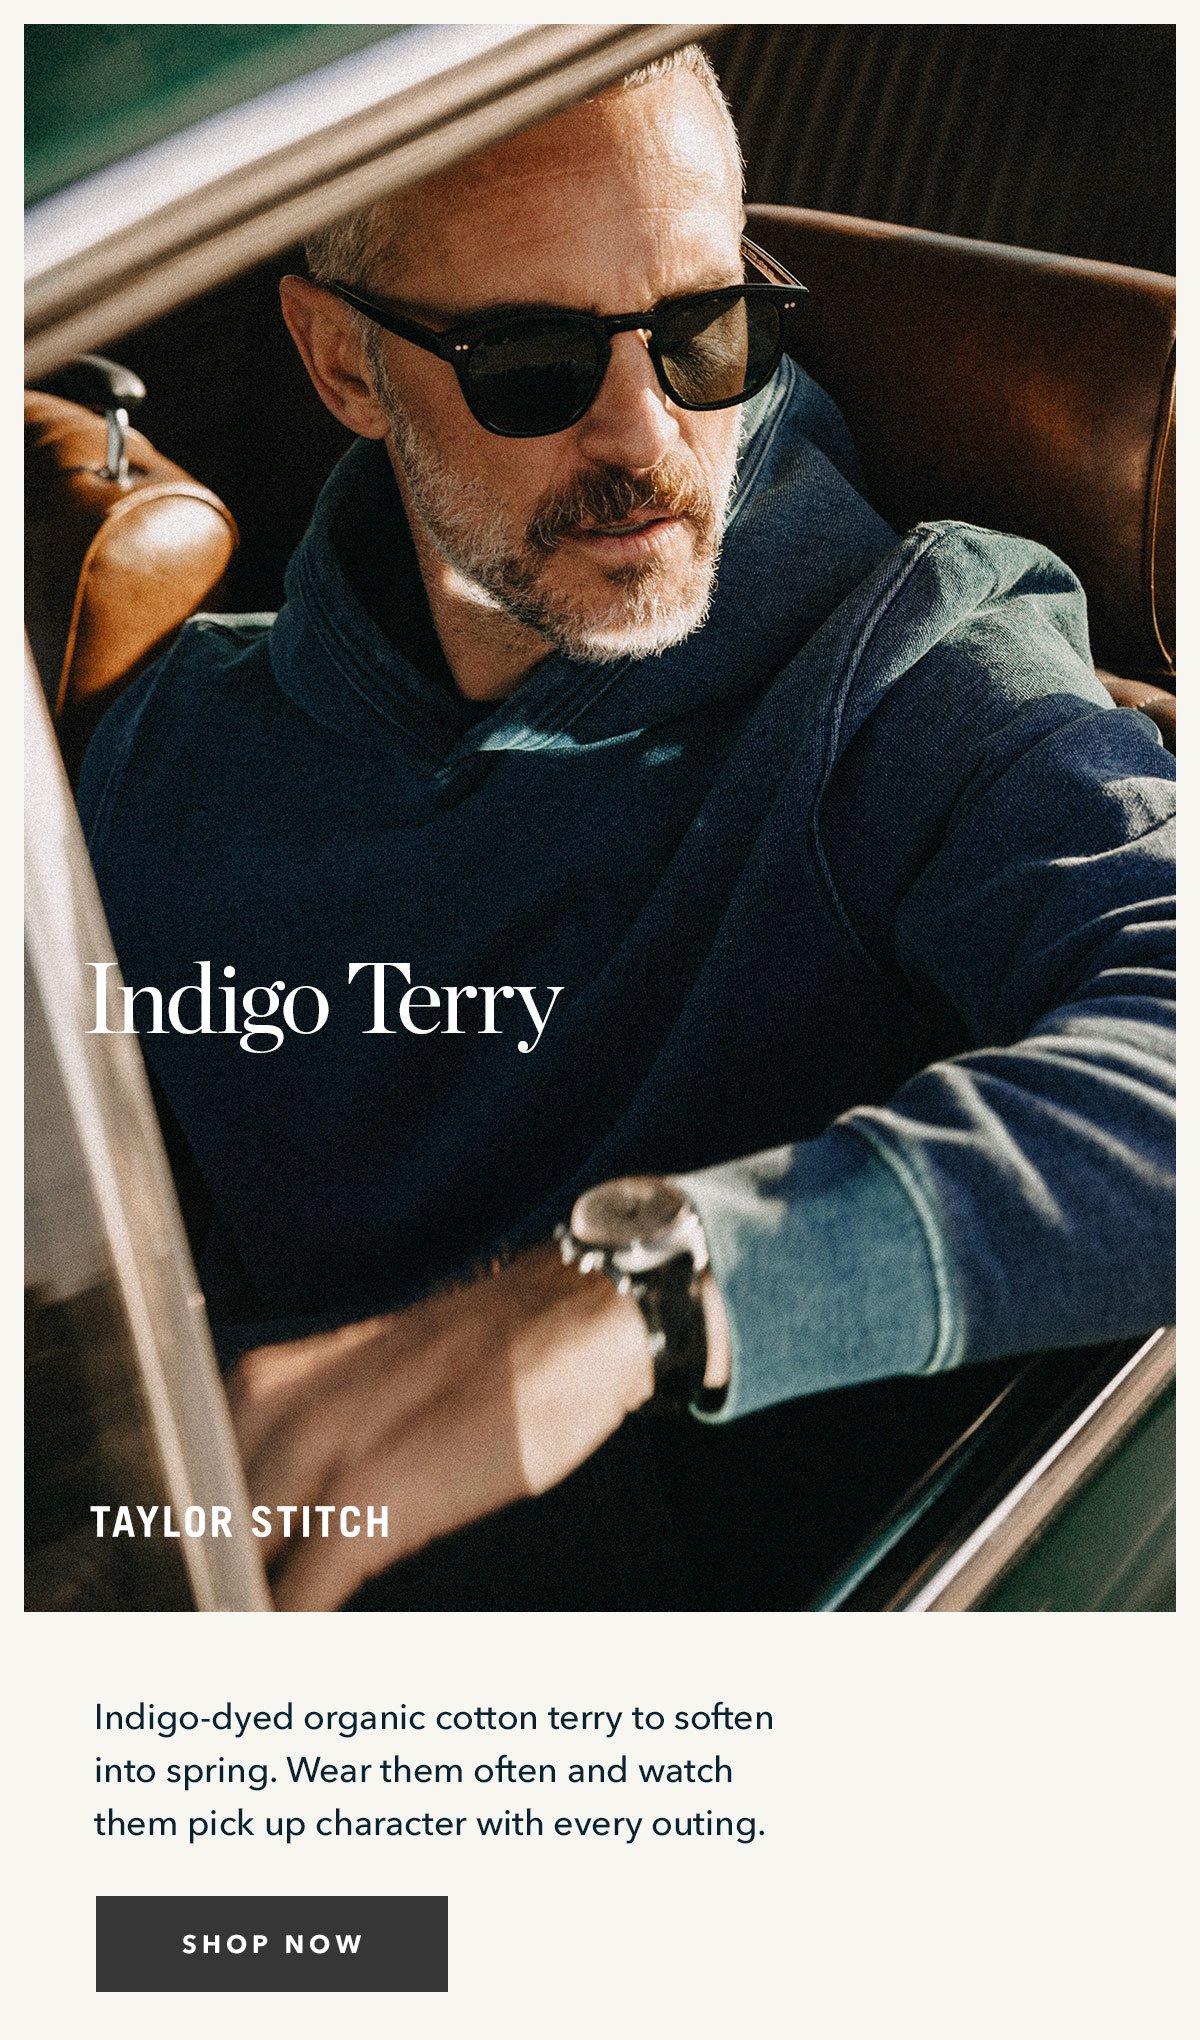 Indigo Terry: Indigo-dyed organic cotton terry to soften into spring. Wear them often and watch them pick up character with every outing.